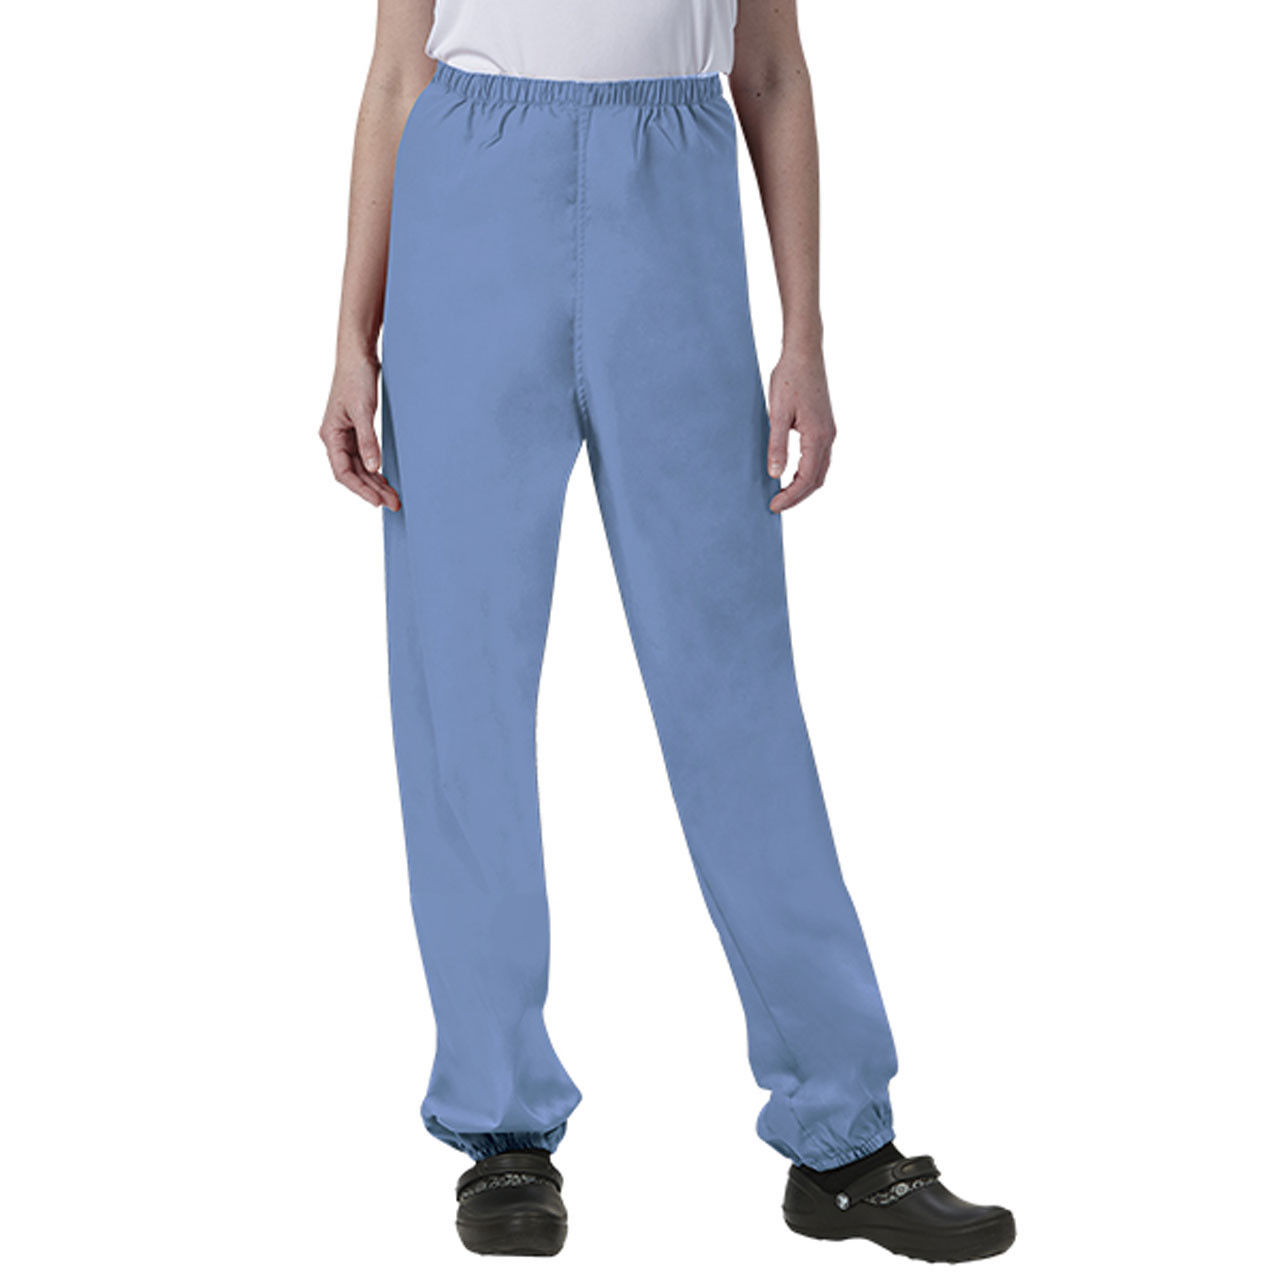 Do polyester elastic waistband wholesalers offer scrub pants for undergarment wear?